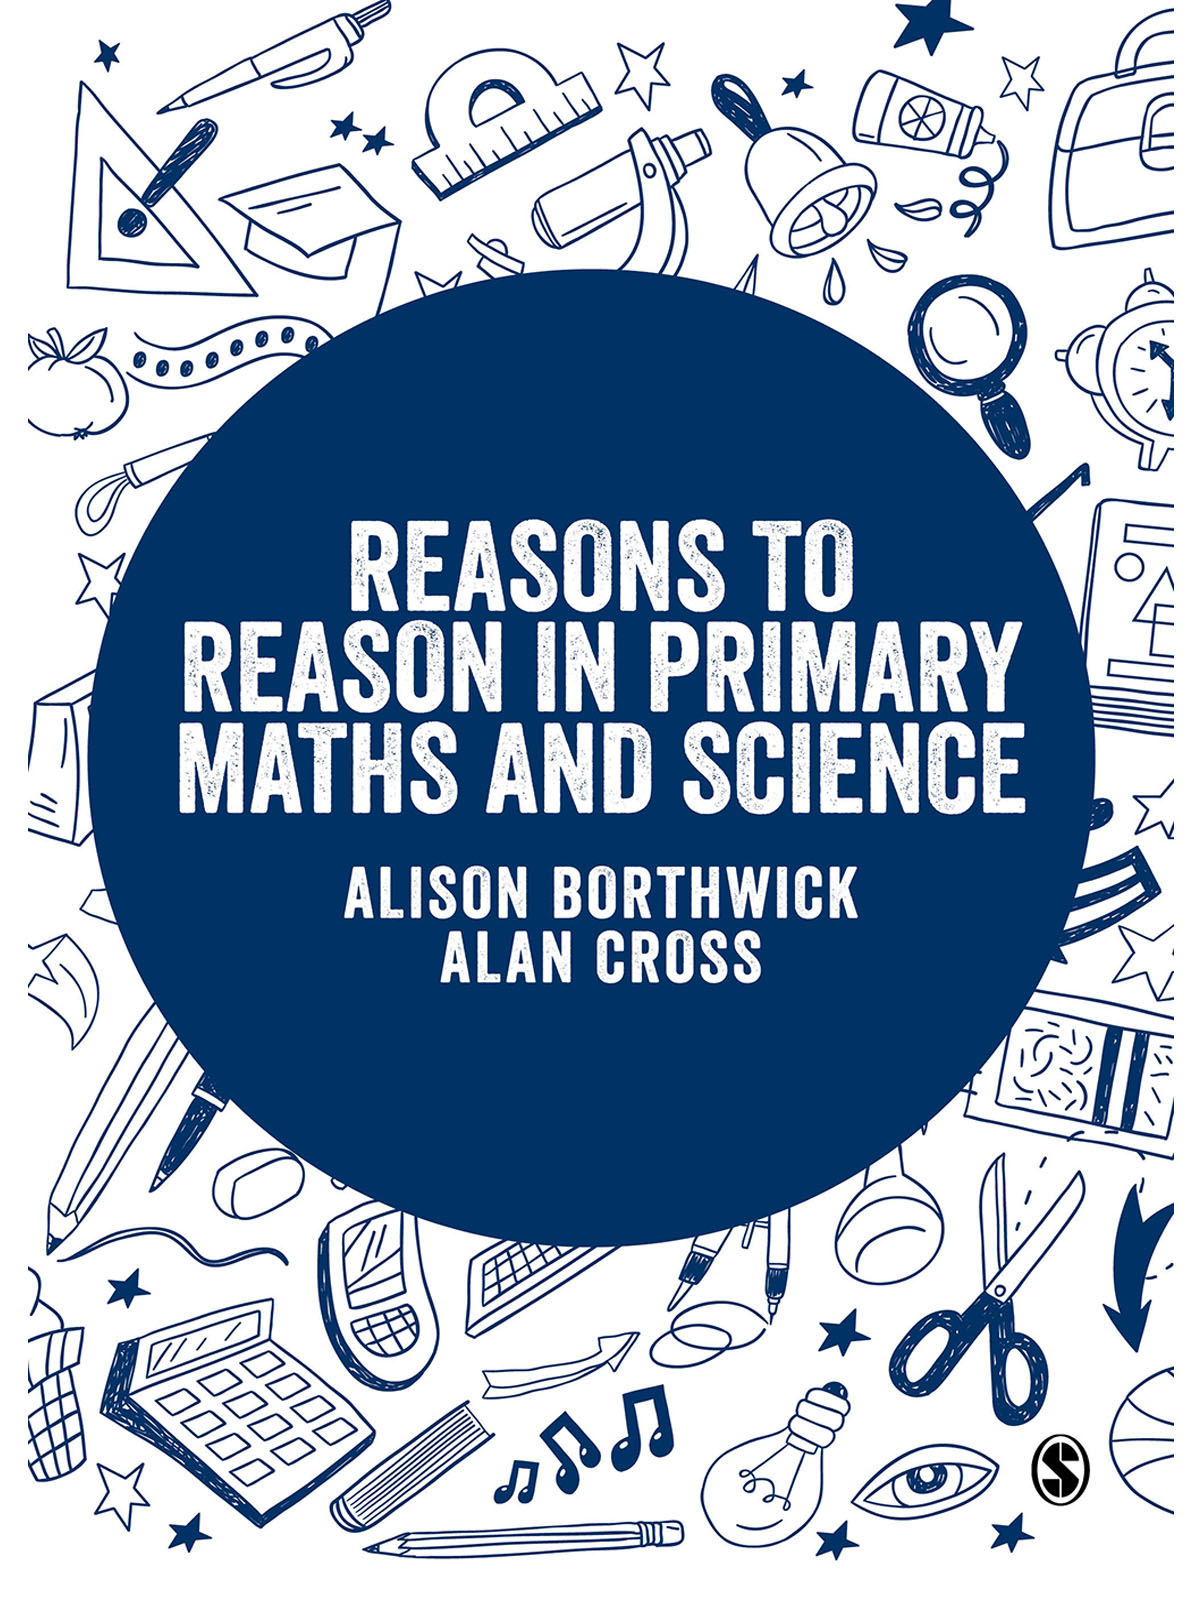 Reasons to Reason in Primary Maths and Science by Alison Borthwick